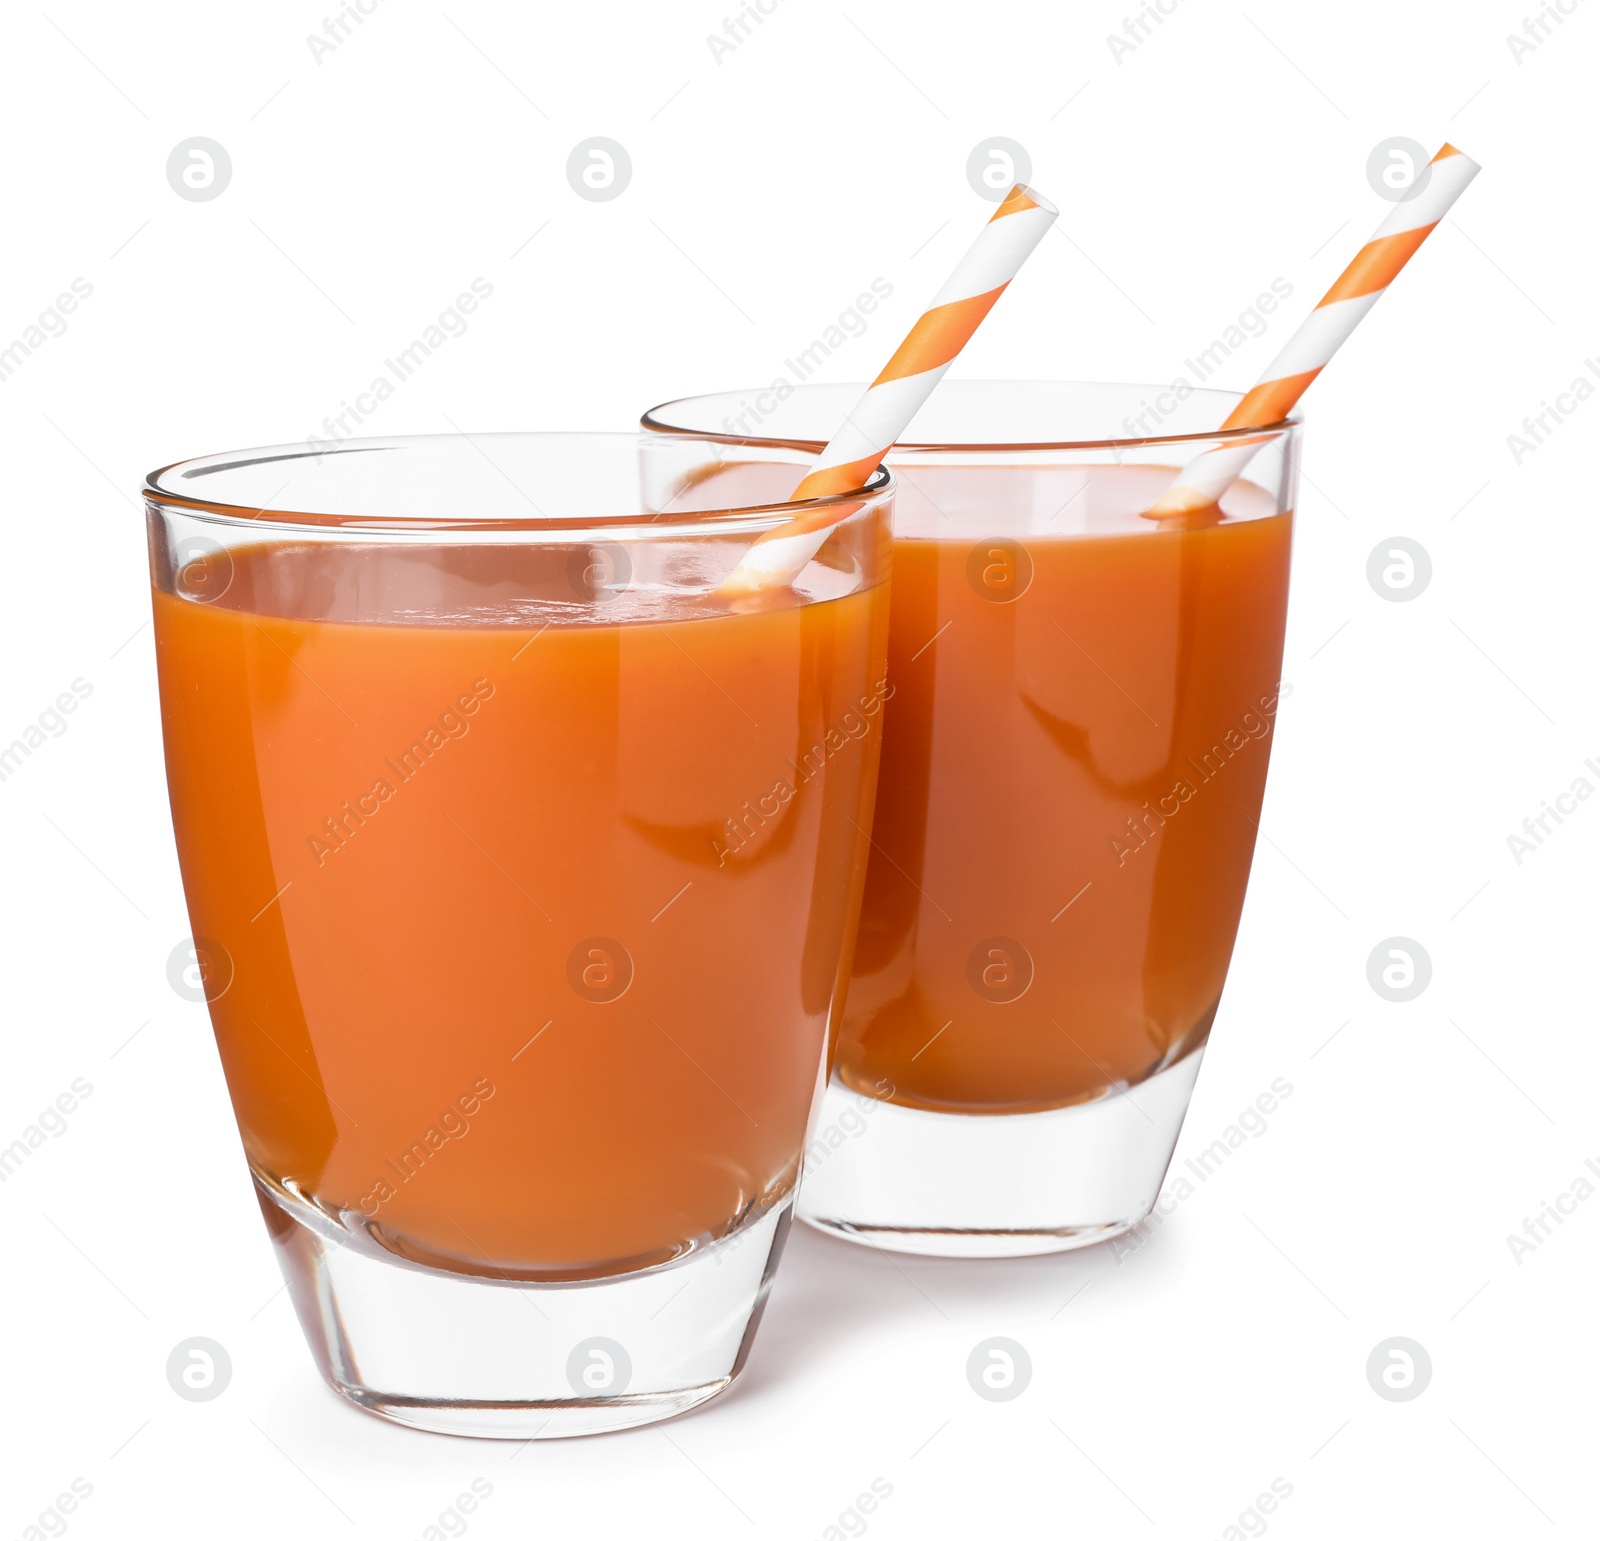 Photo of Two glasses of carrot juice with straws on white background